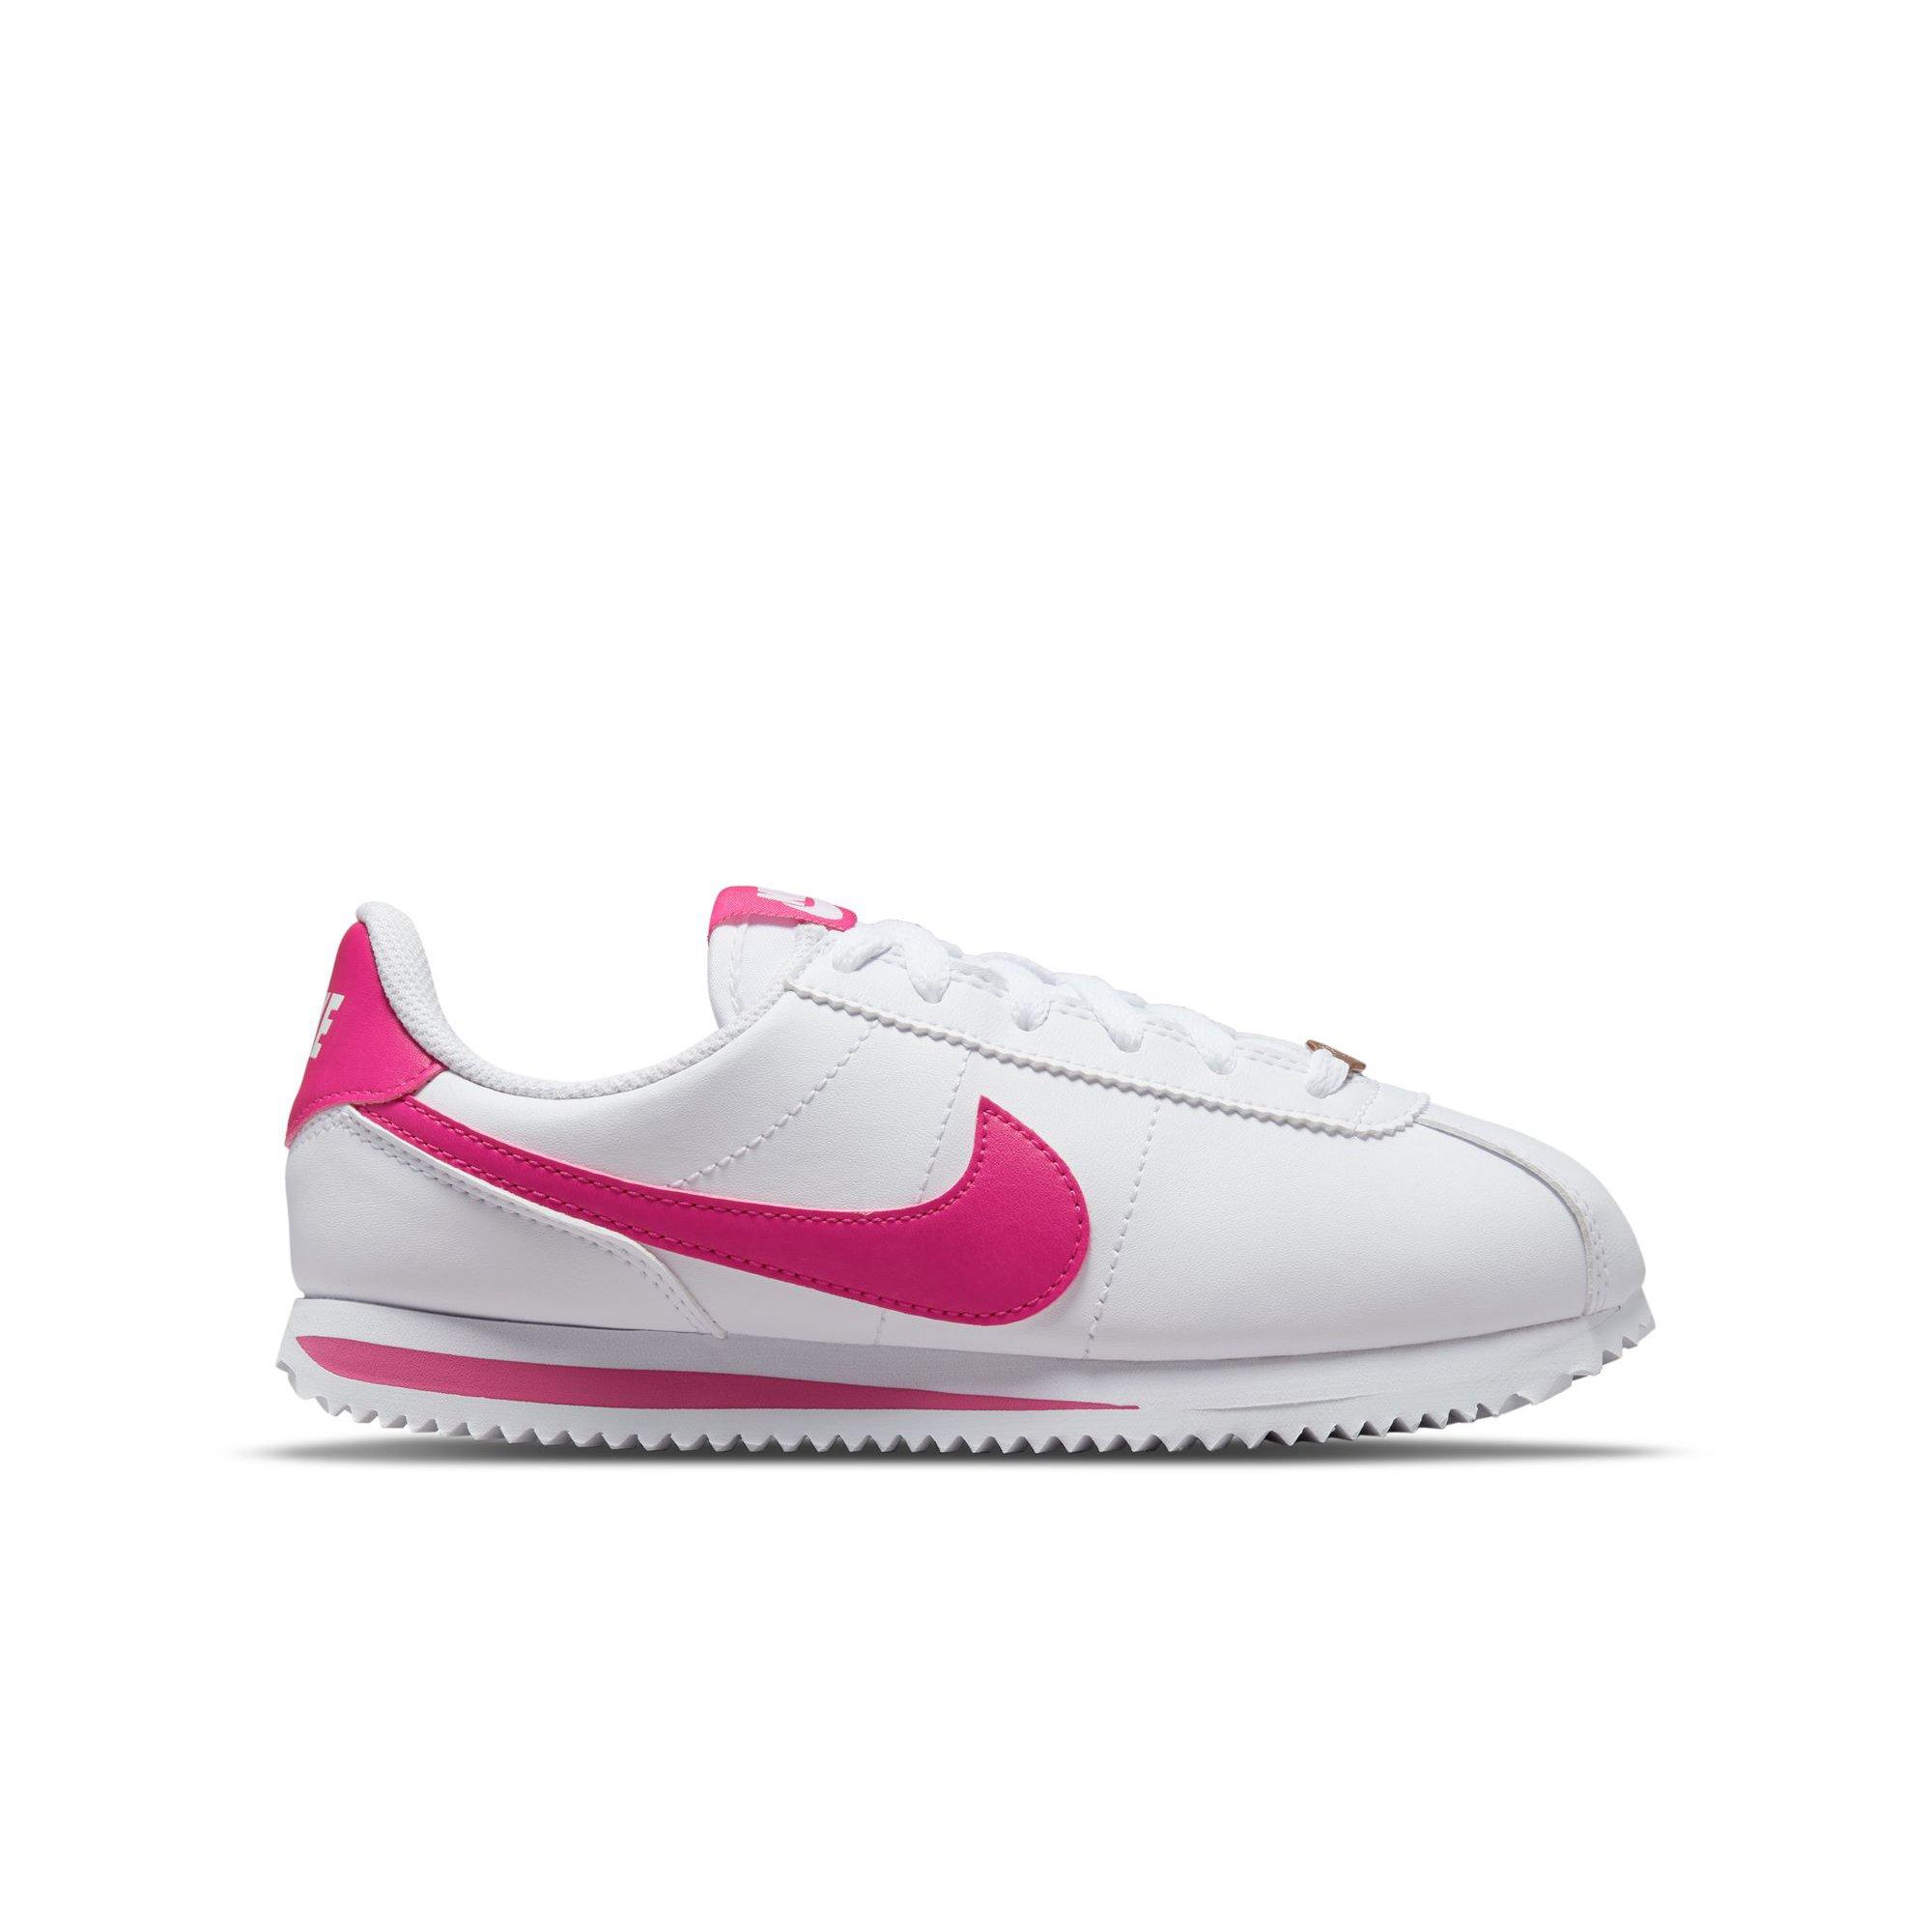 Buy Nike Cortez Shoes For Women Pink online